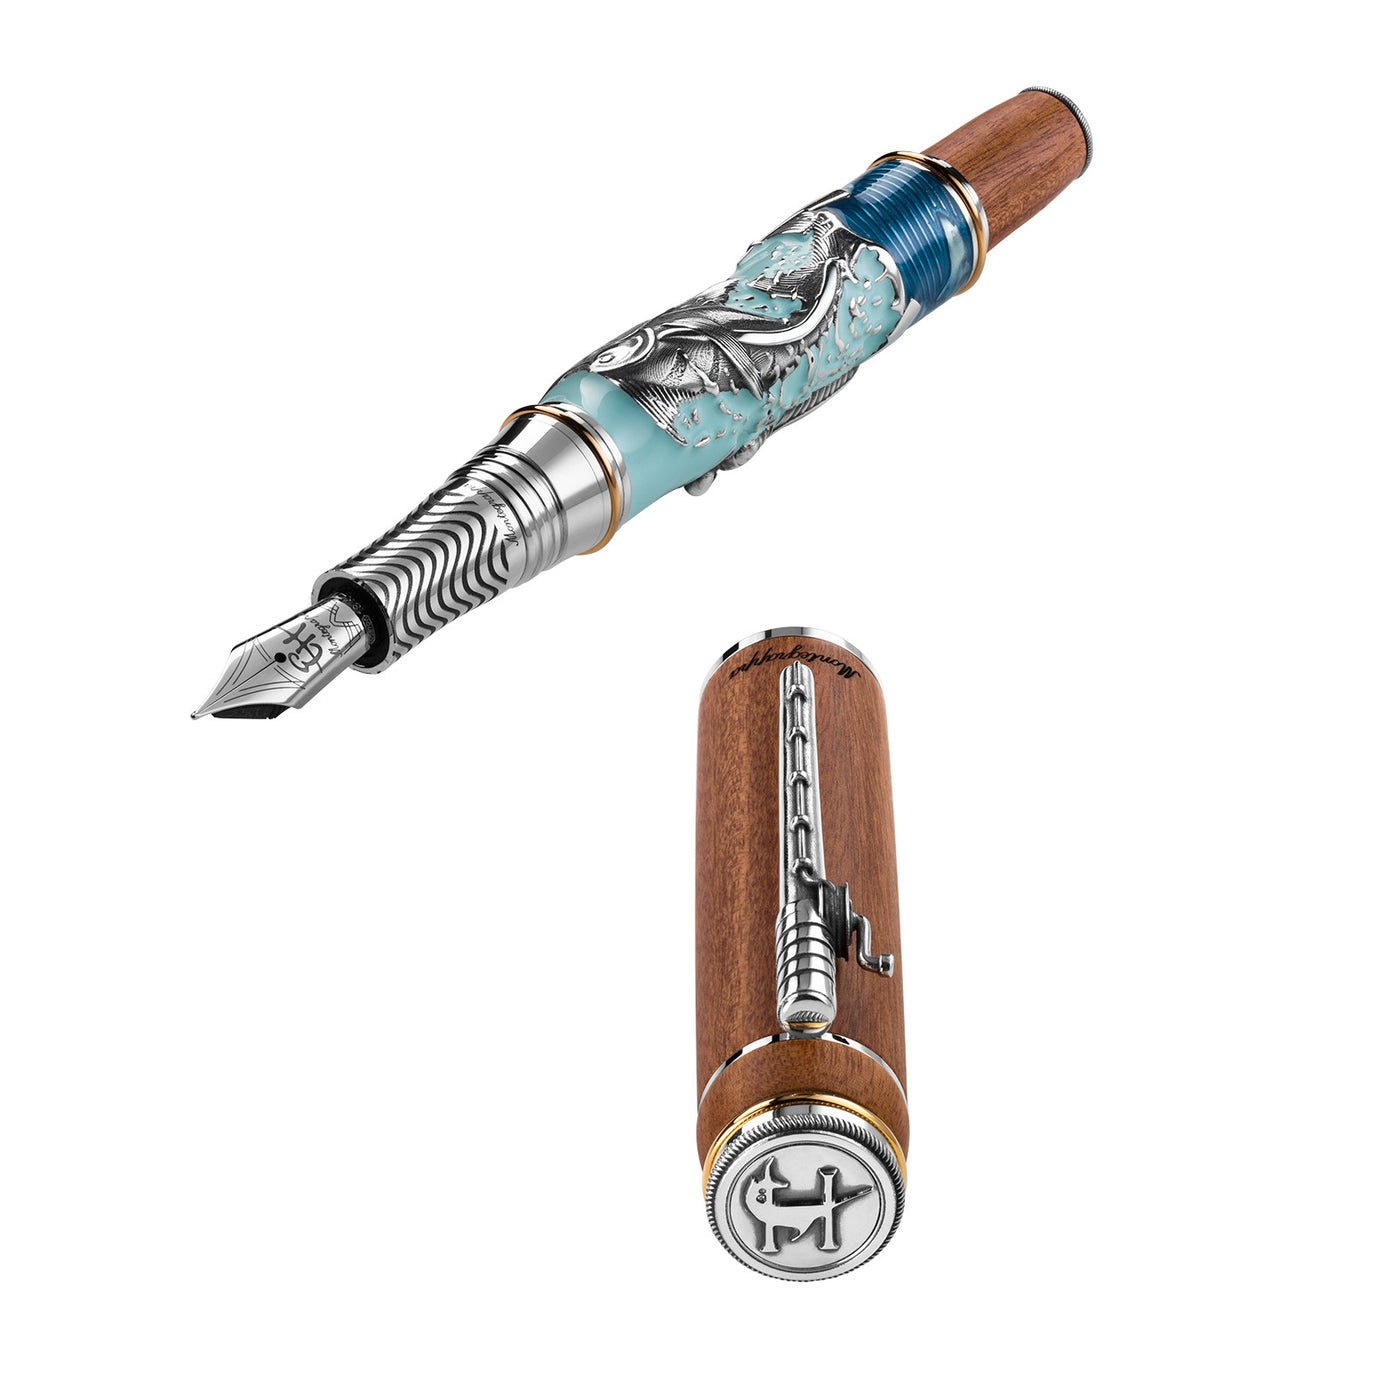 Montegrappa the Old Man and the Sea Fountain Pen (Limited Edition)